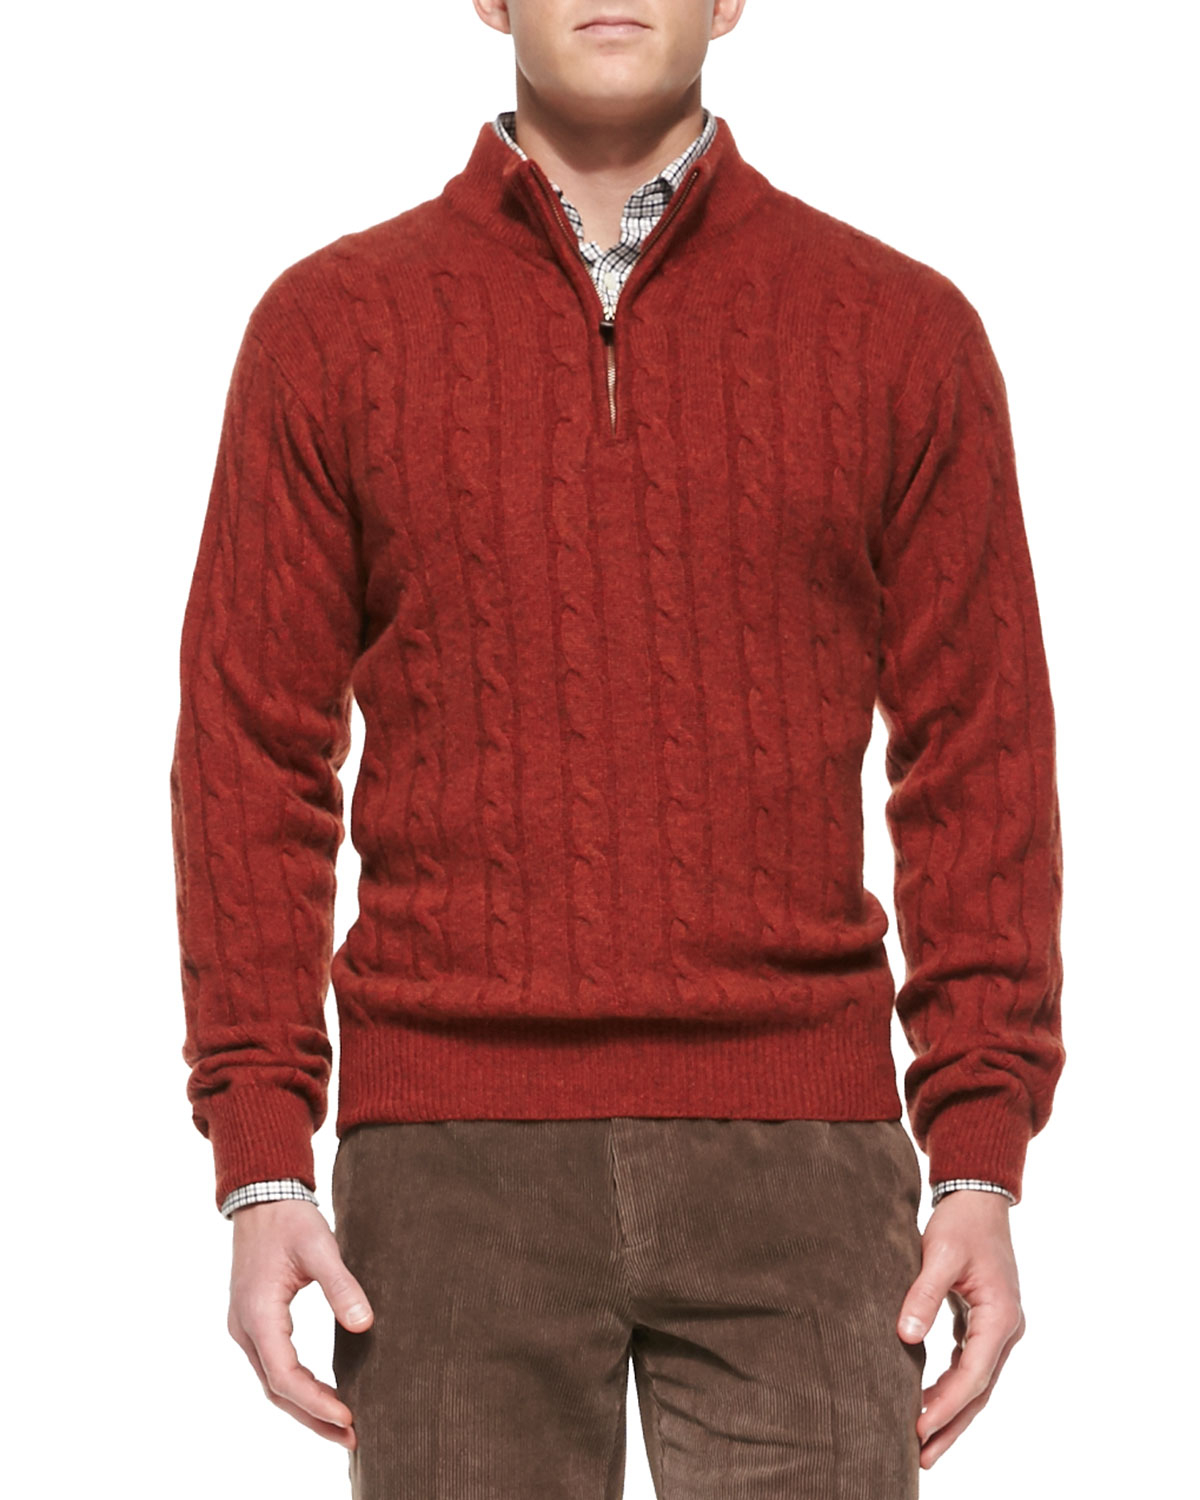 Lyst - Peter Millar Cashmere Cable Knit 1/2-Zip Sweater in Orange